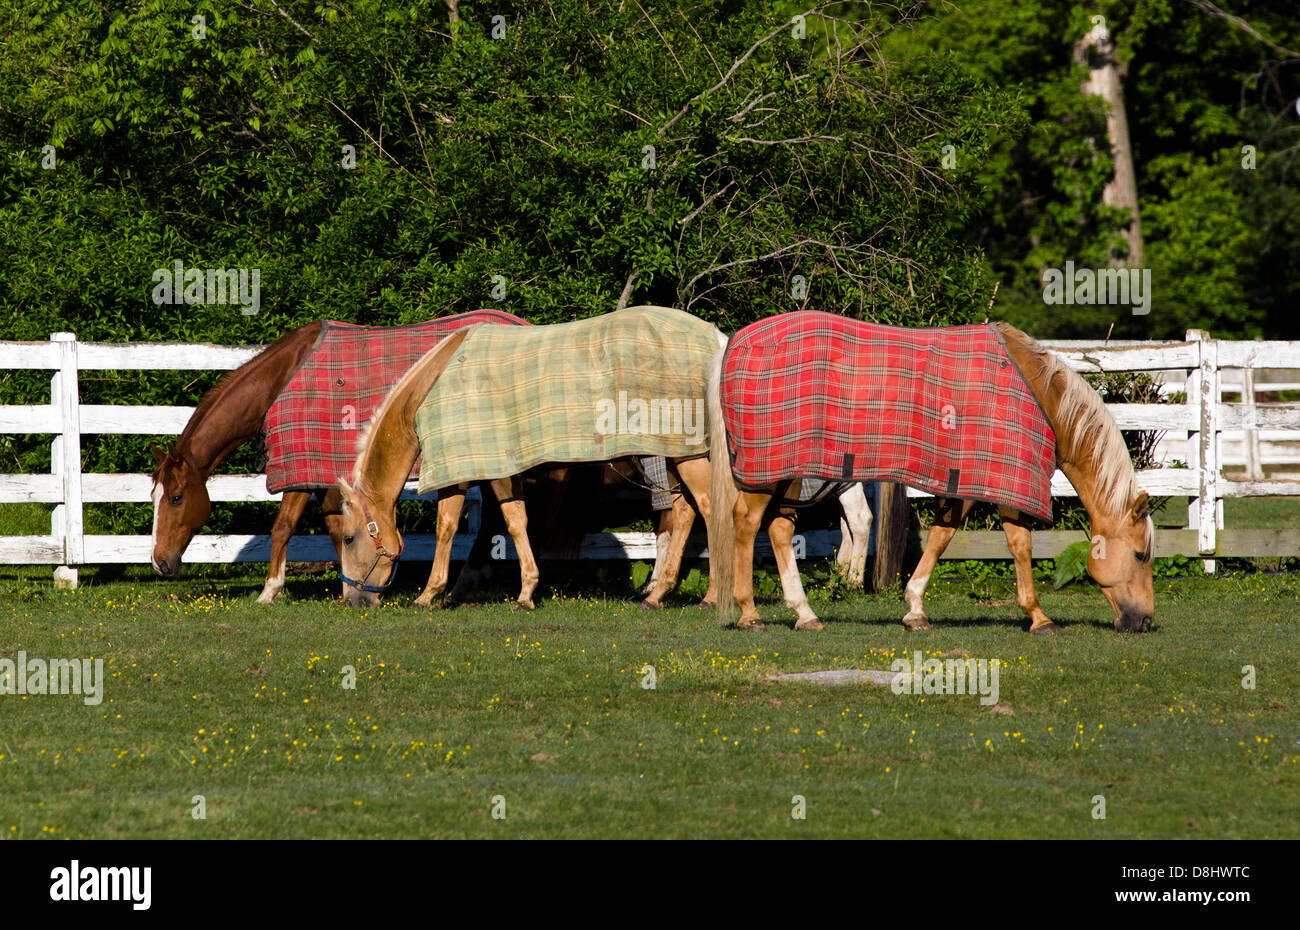 Horses with horse blankets in a corral. Stock Photo